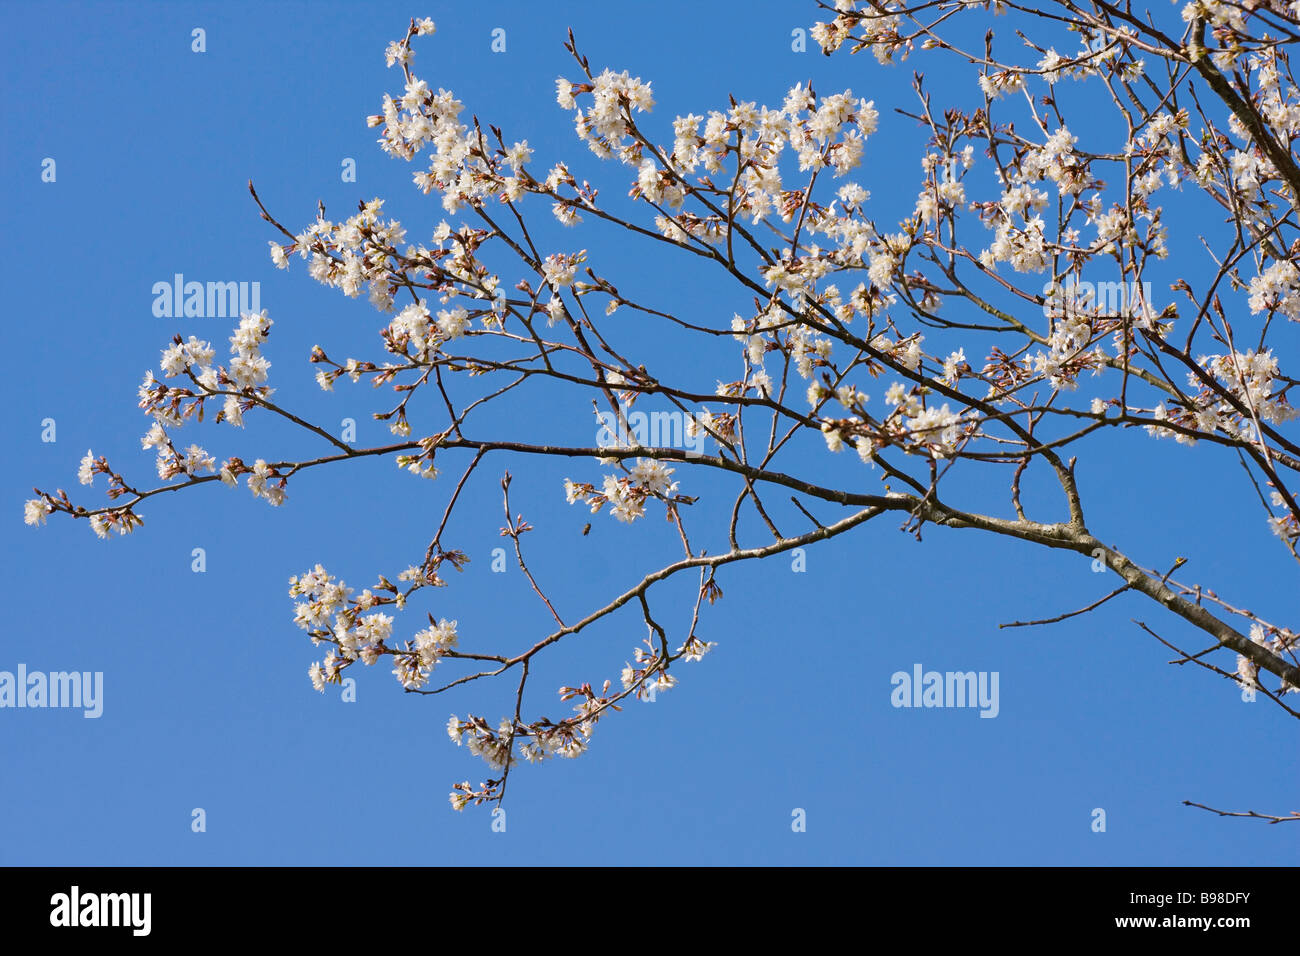 England, UK. White cherry blossom against a blue sky in Spring Stock Photo